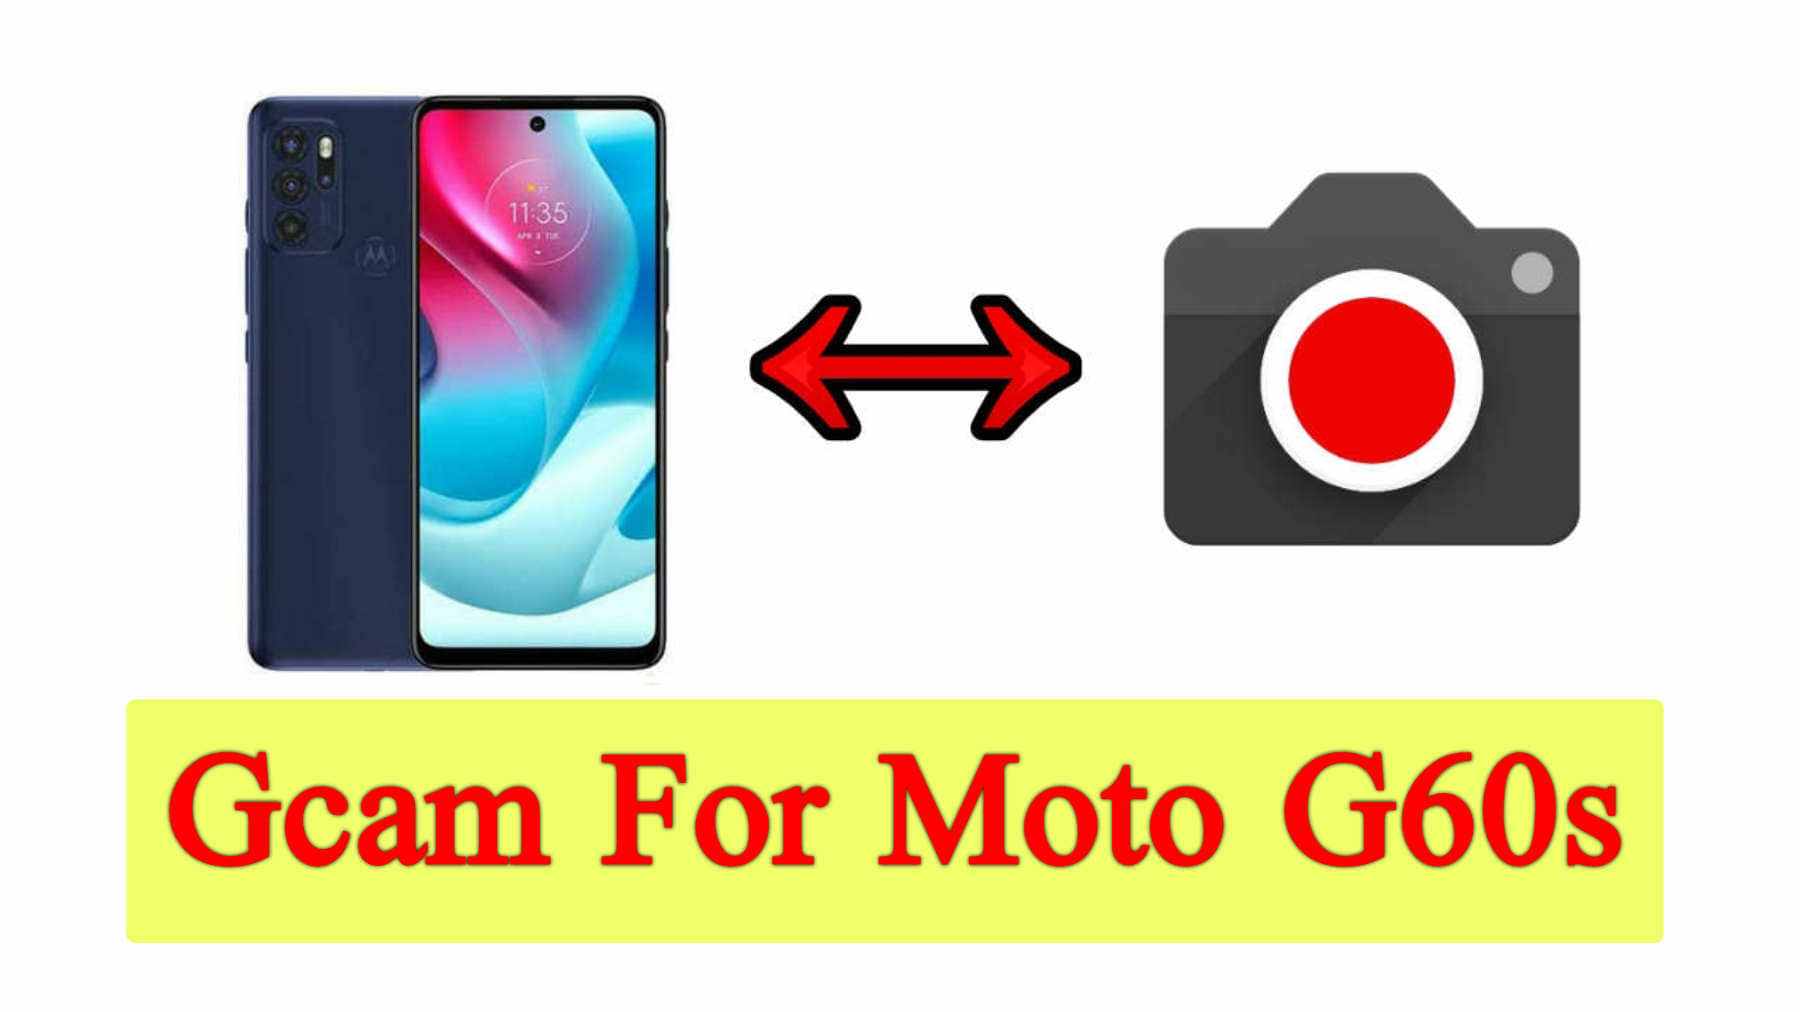 Download GCam for Moto G60s